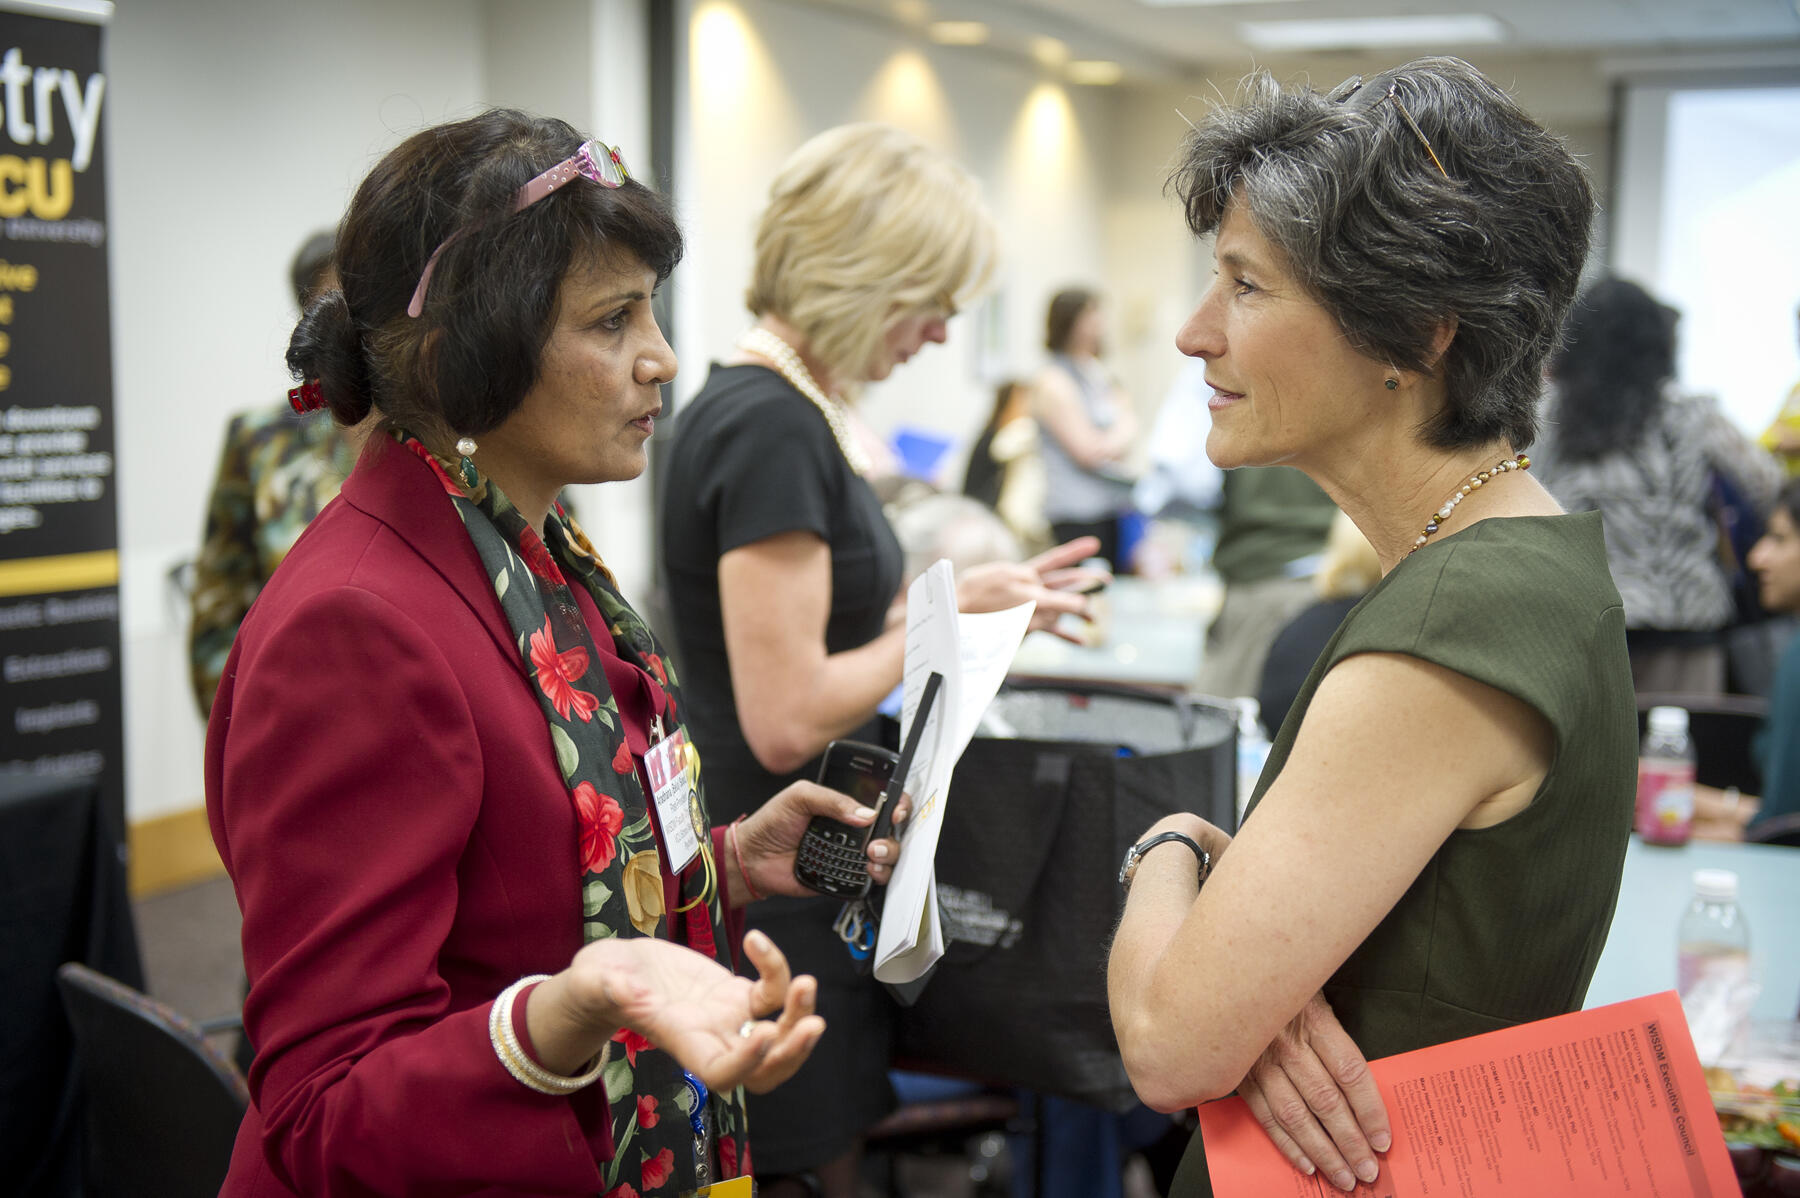 Cathy Howard, left, speaking with an attendee of an event.